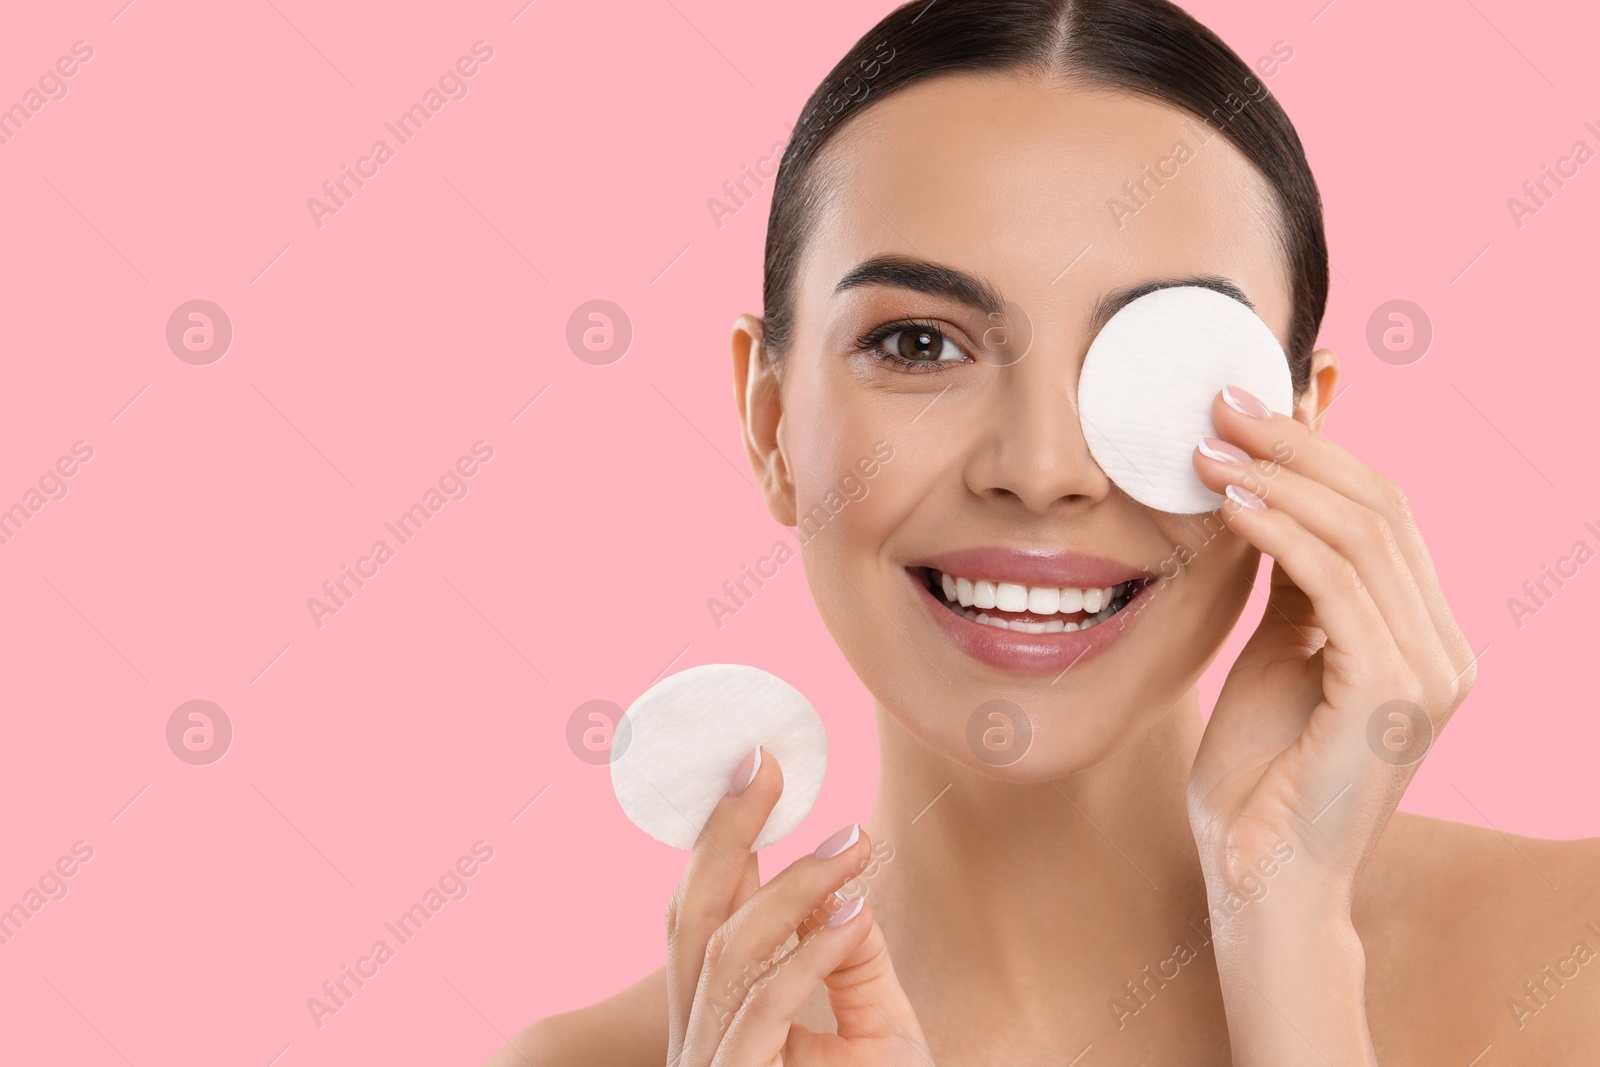 Photo of Beautiful woman removing makeup with cotton pads on pink background. Space for text